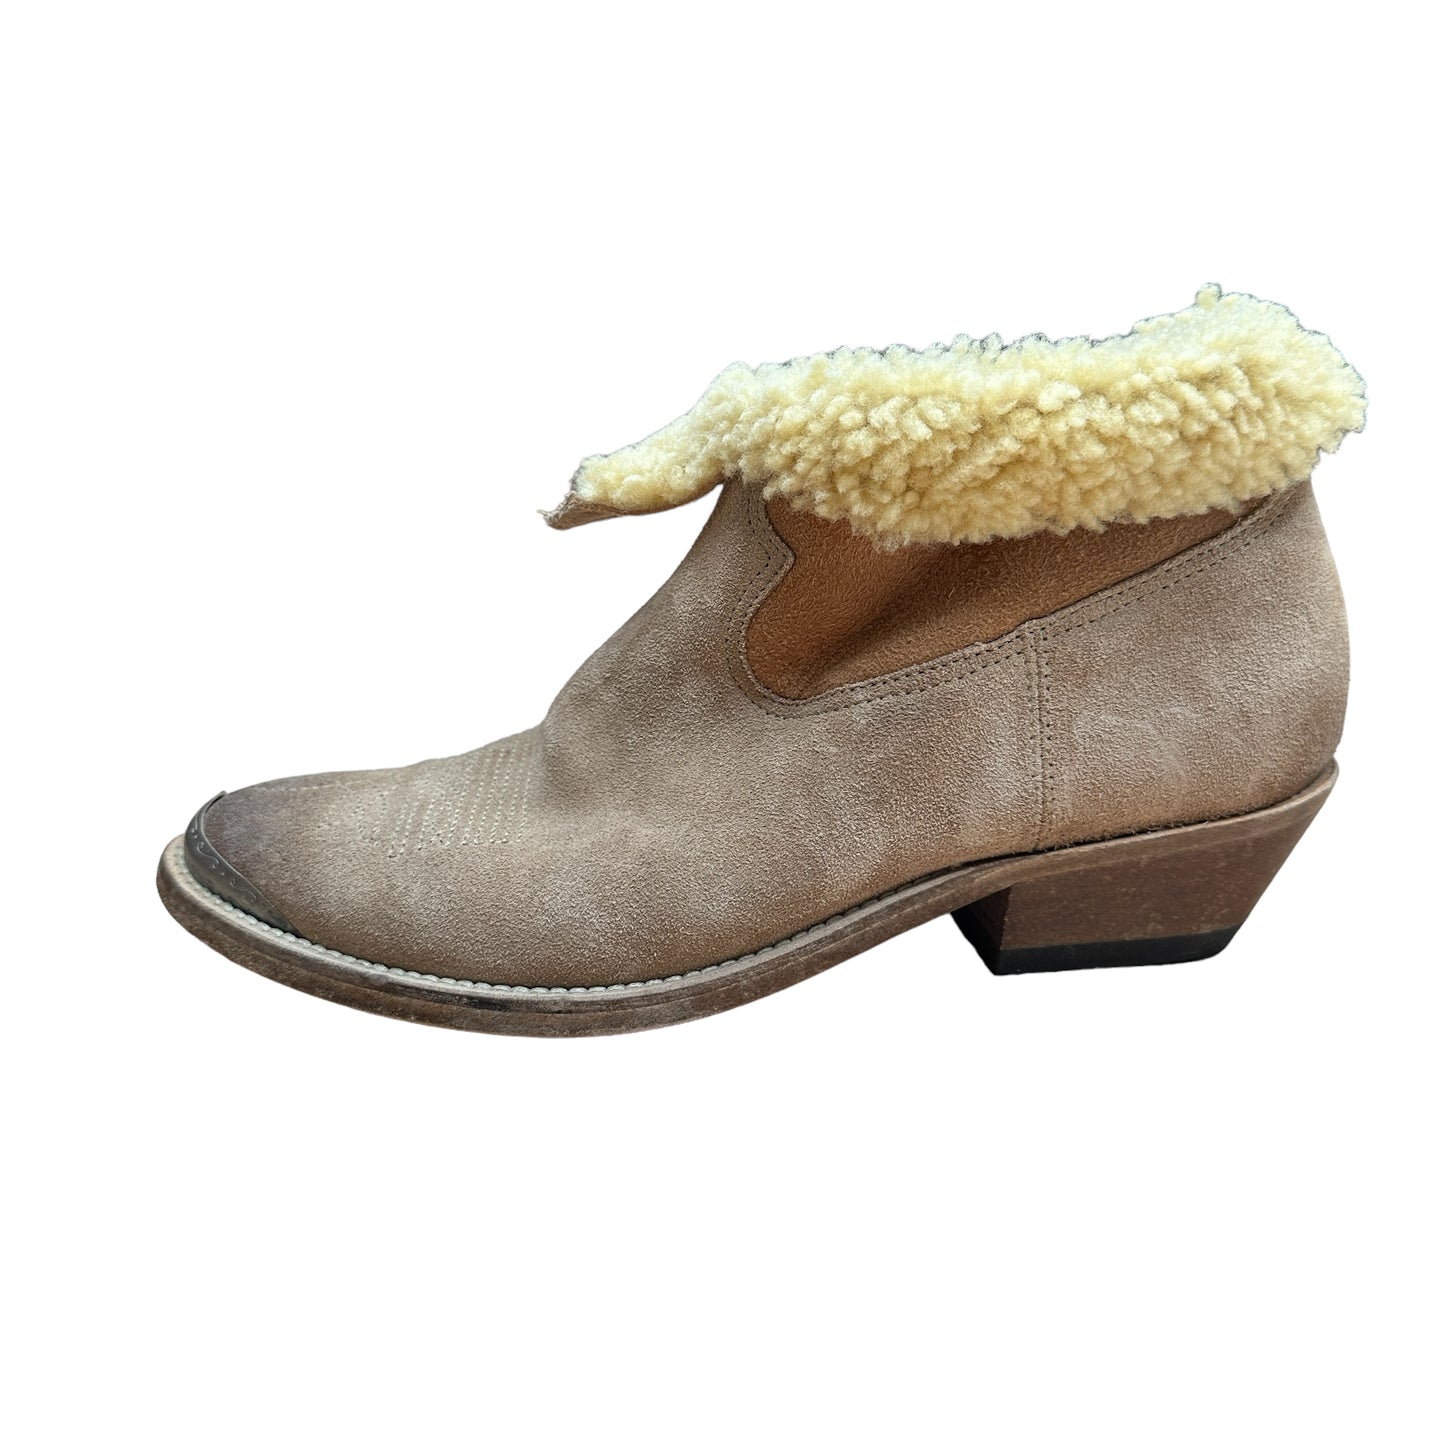 Suede & Shearling Boots - 7